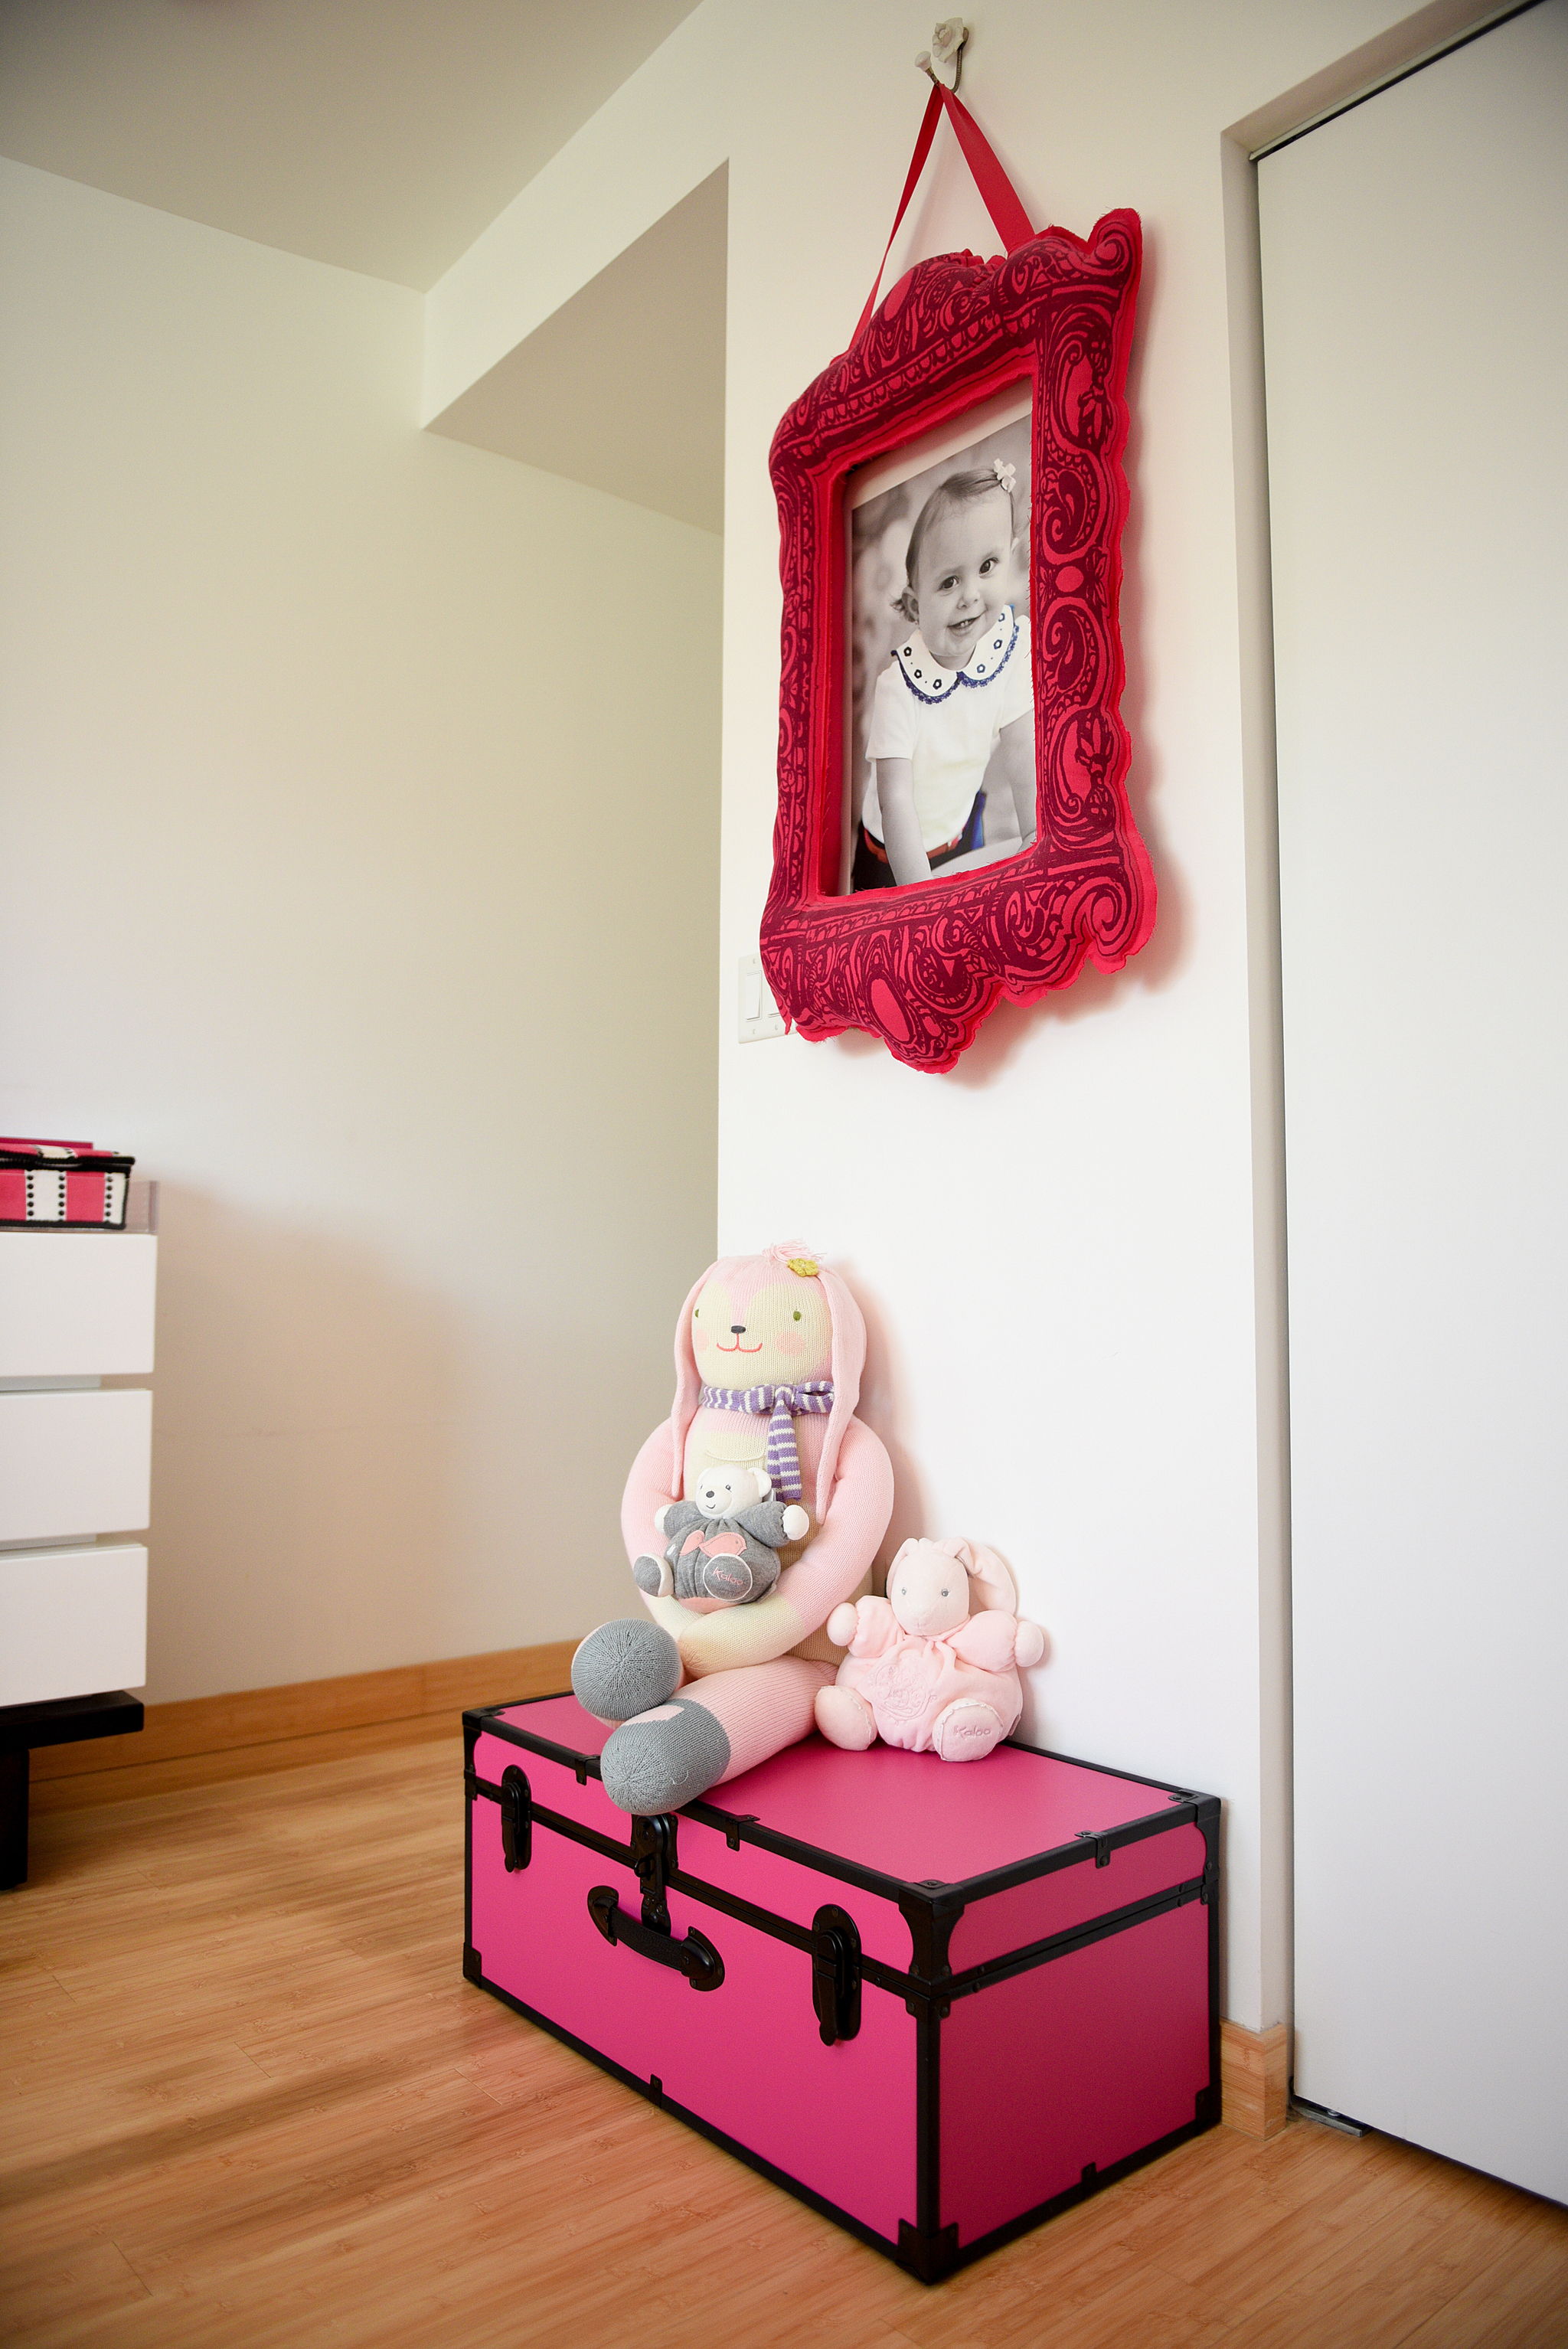 Red and Hot Pink Nursery Decor